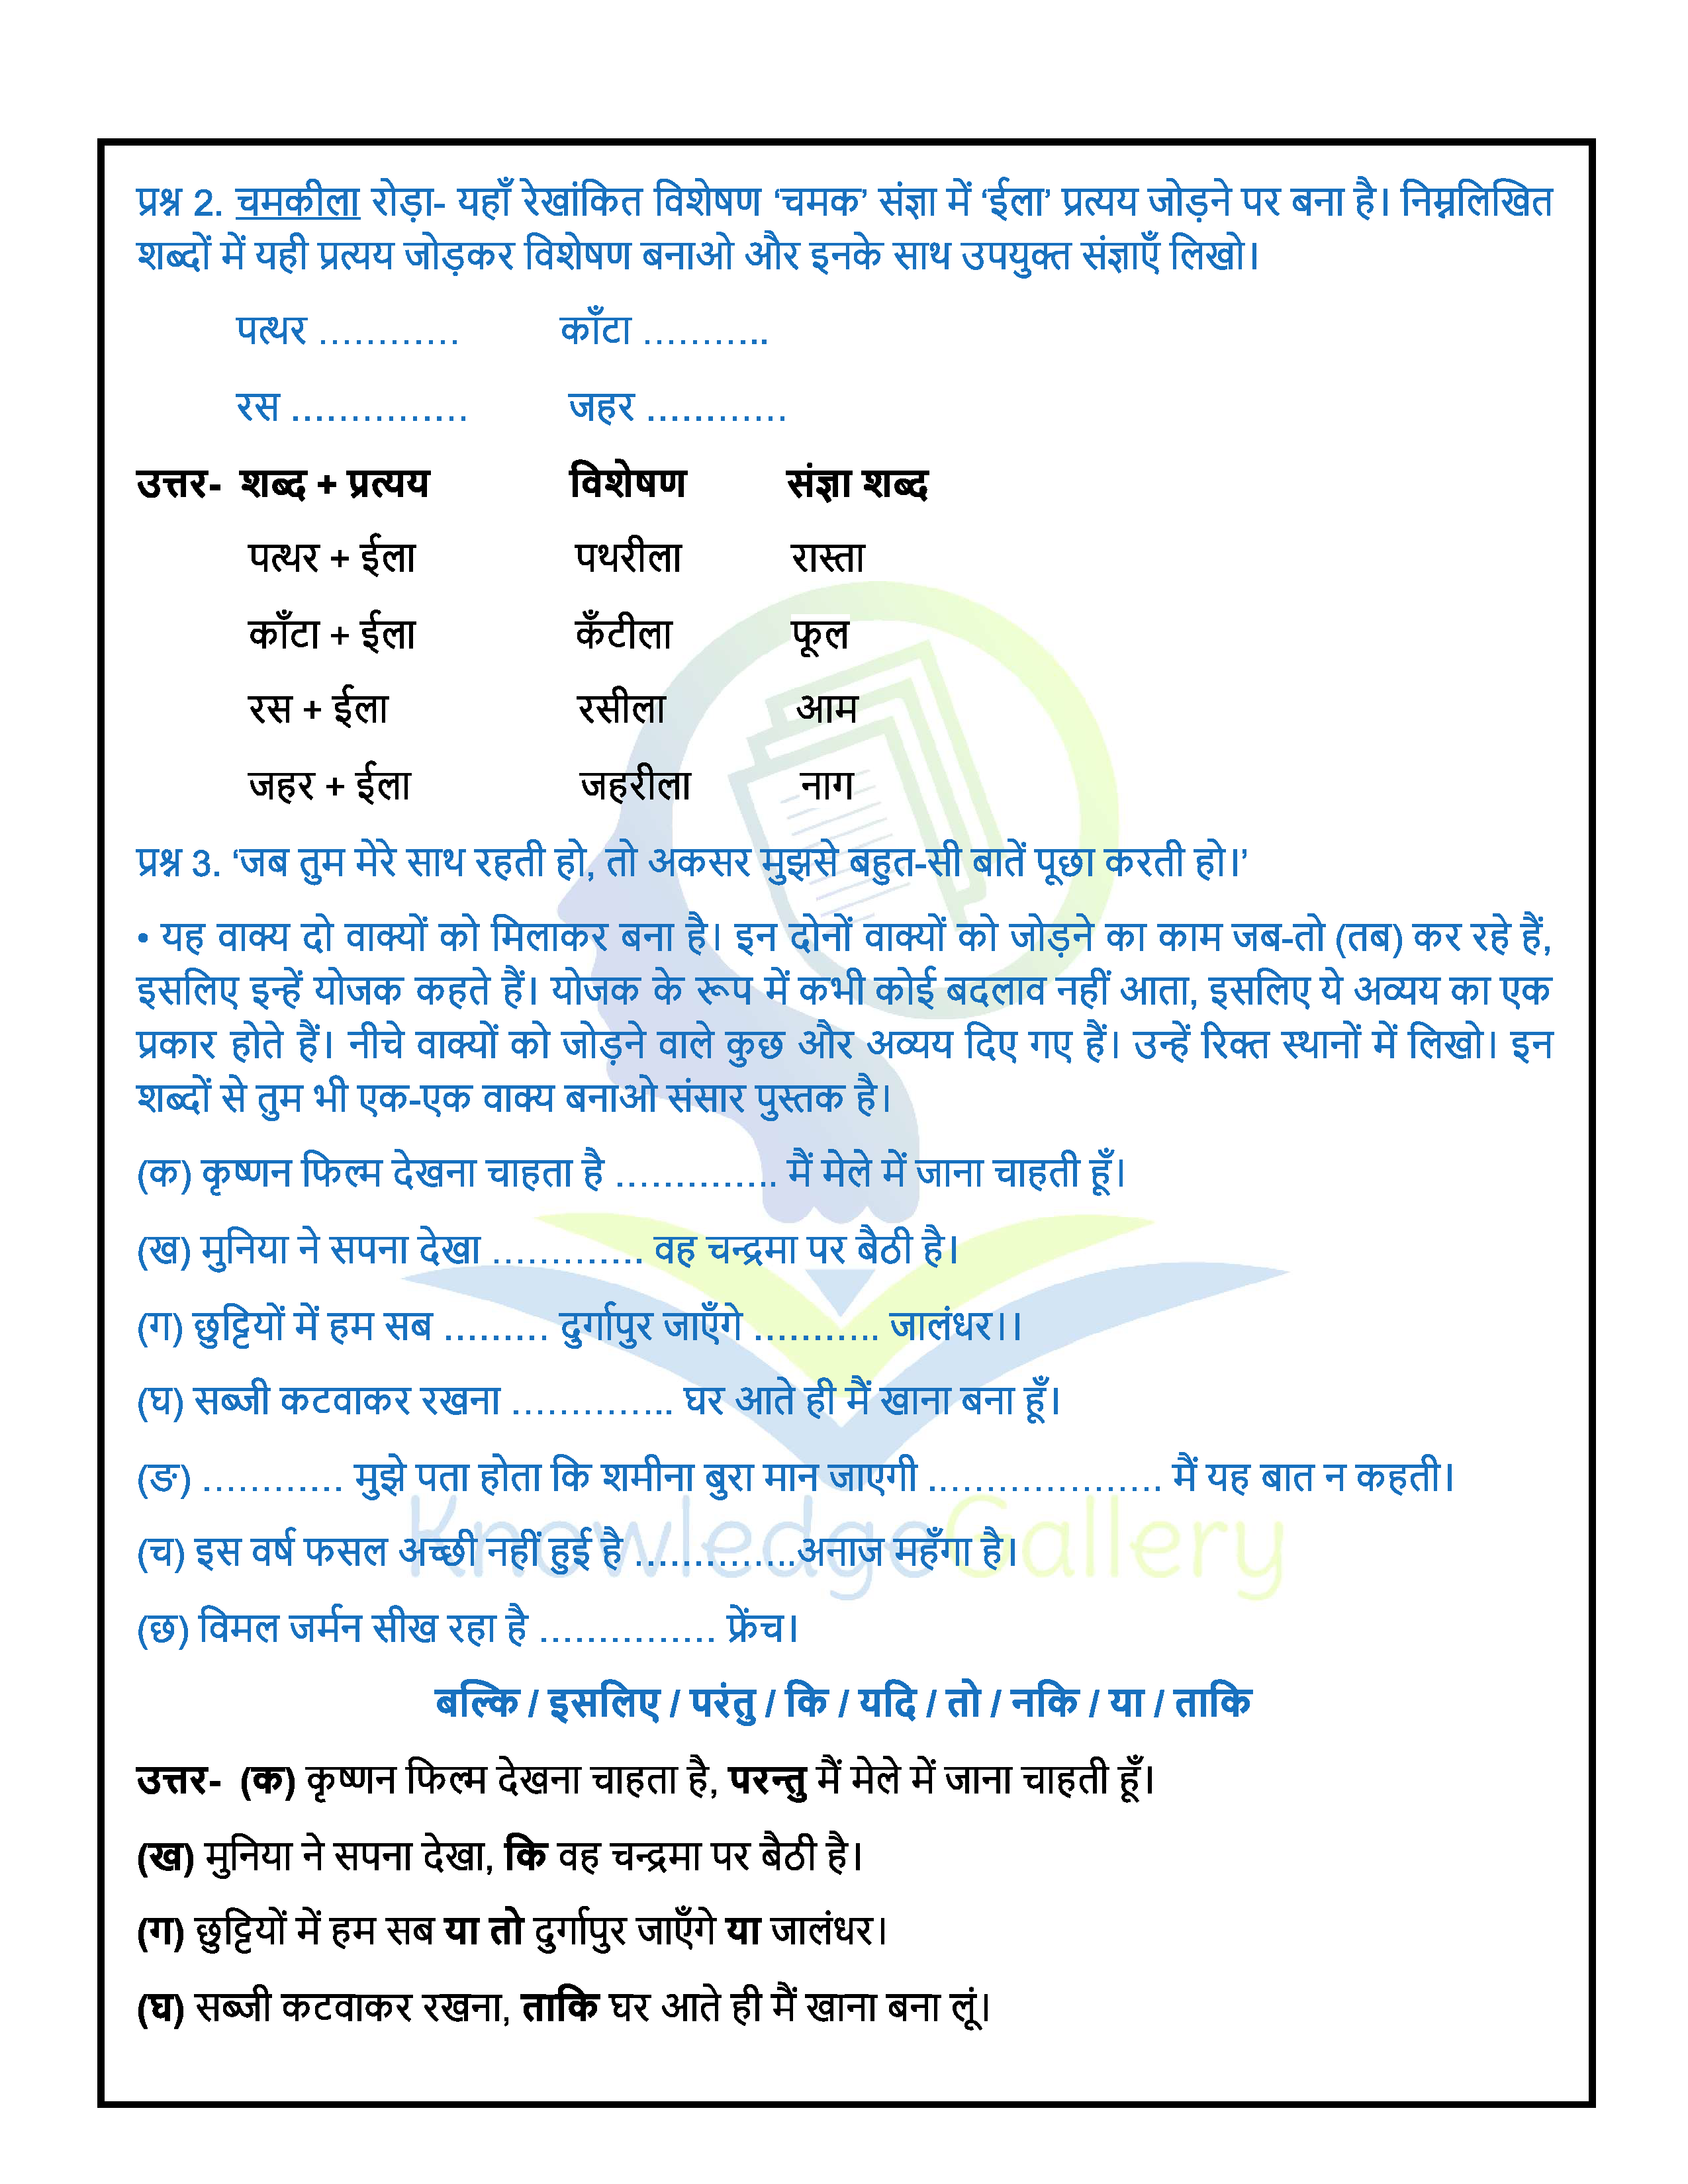 NCERT Solution For Class 6 Hindi Chapter 12 part 4